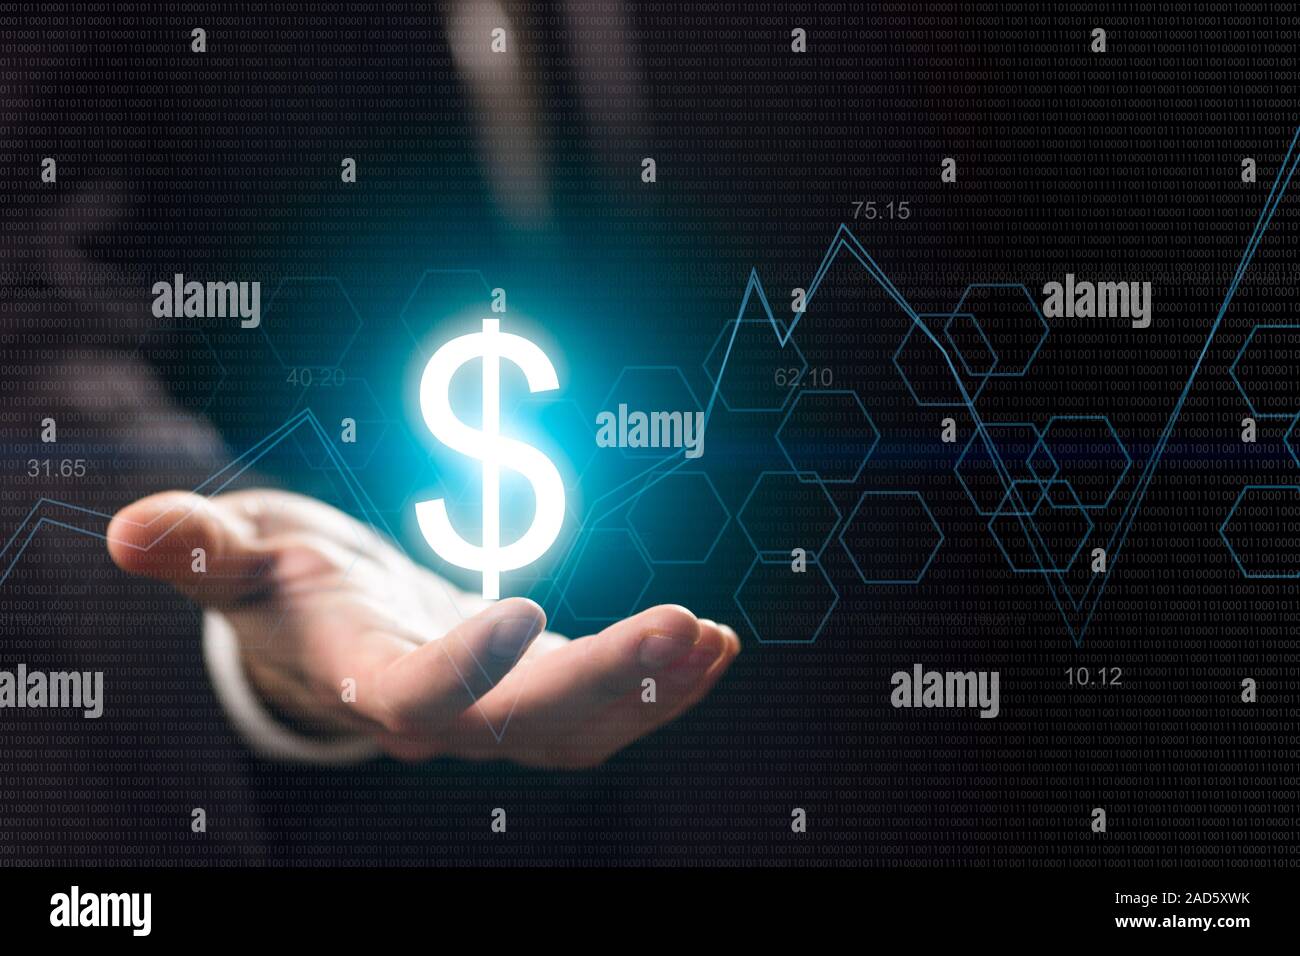 Currency symbols on human hand. Money making and wealth Stock Photo